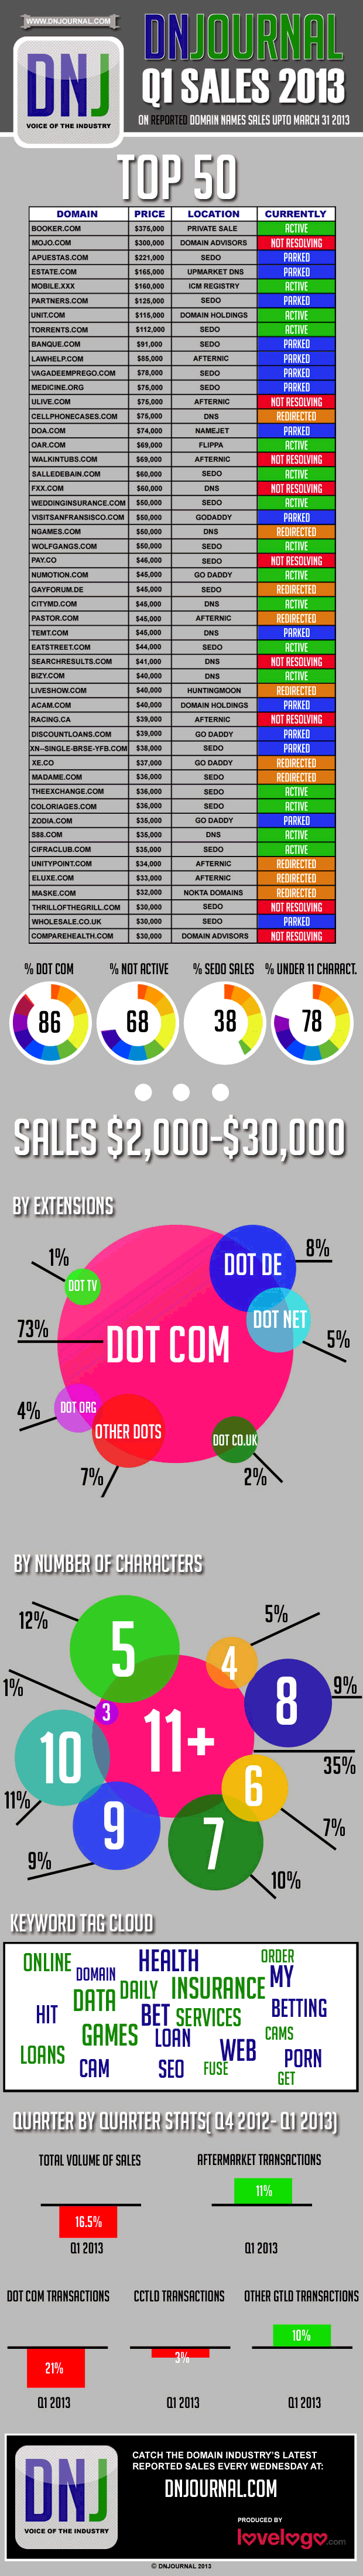 DNJ REPORTED SALES INFOGRAPHIC